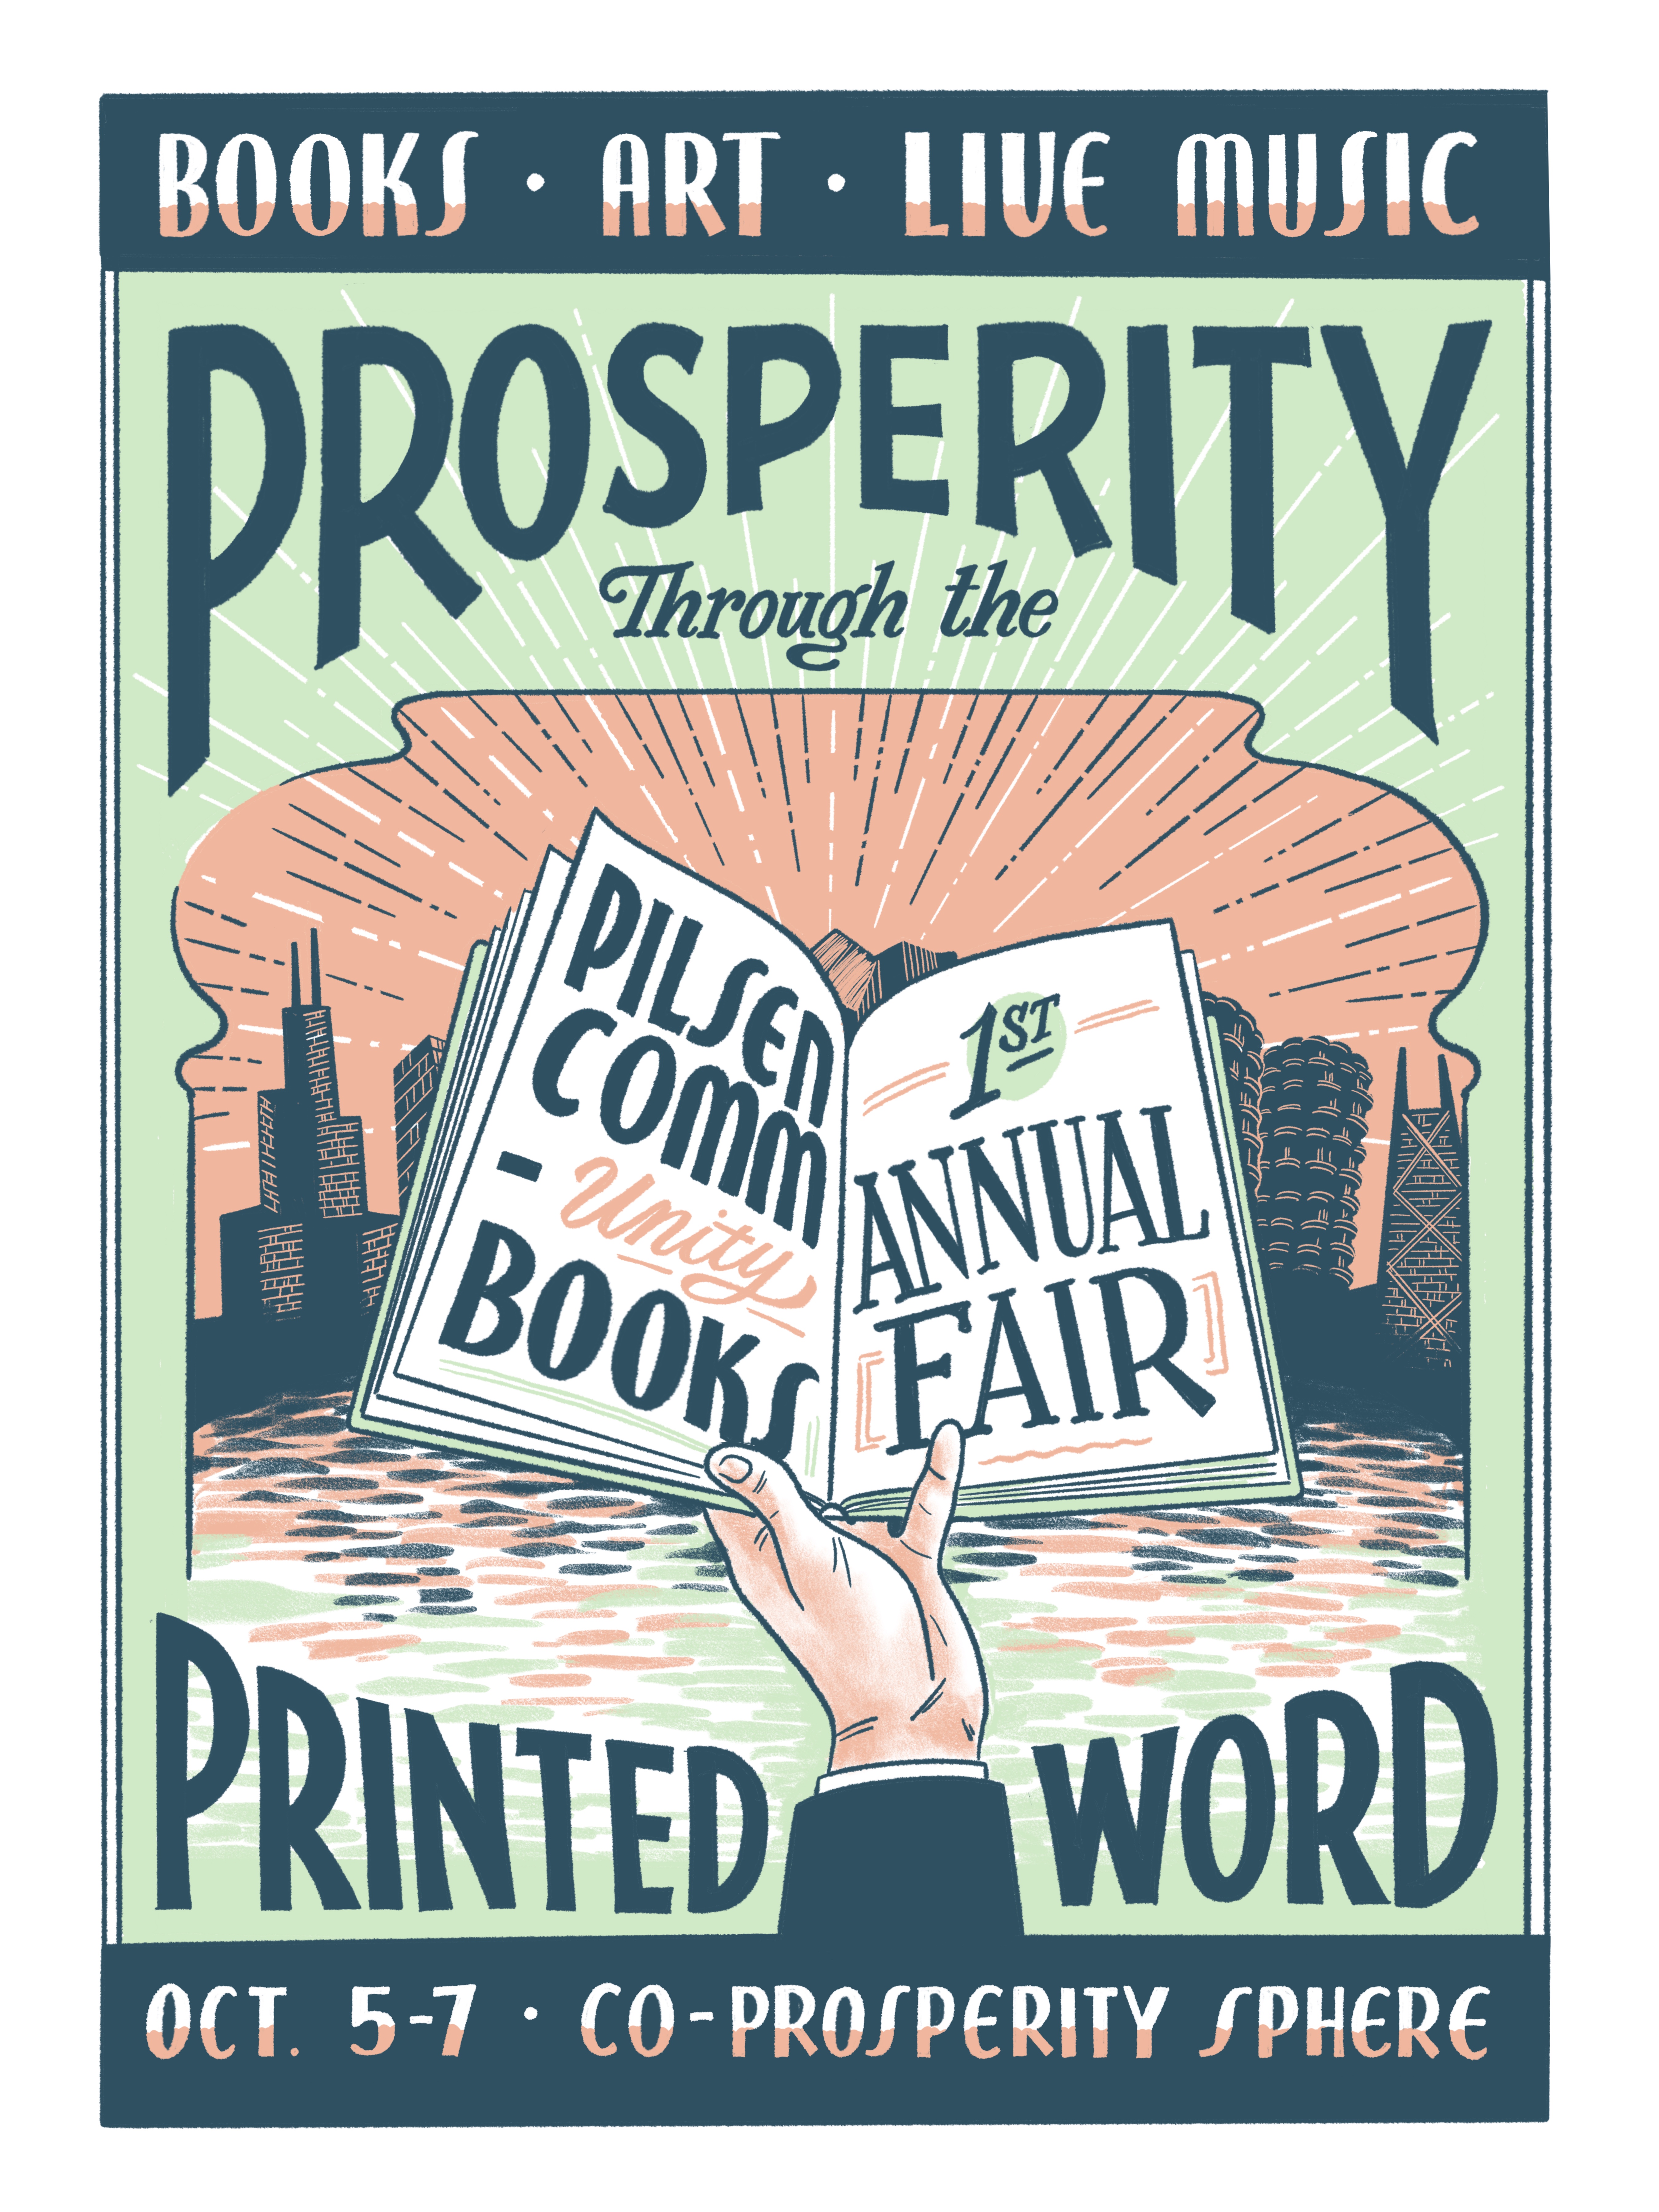 PCB-Book-Fair-Poster_by-Shelby-Rodeffer